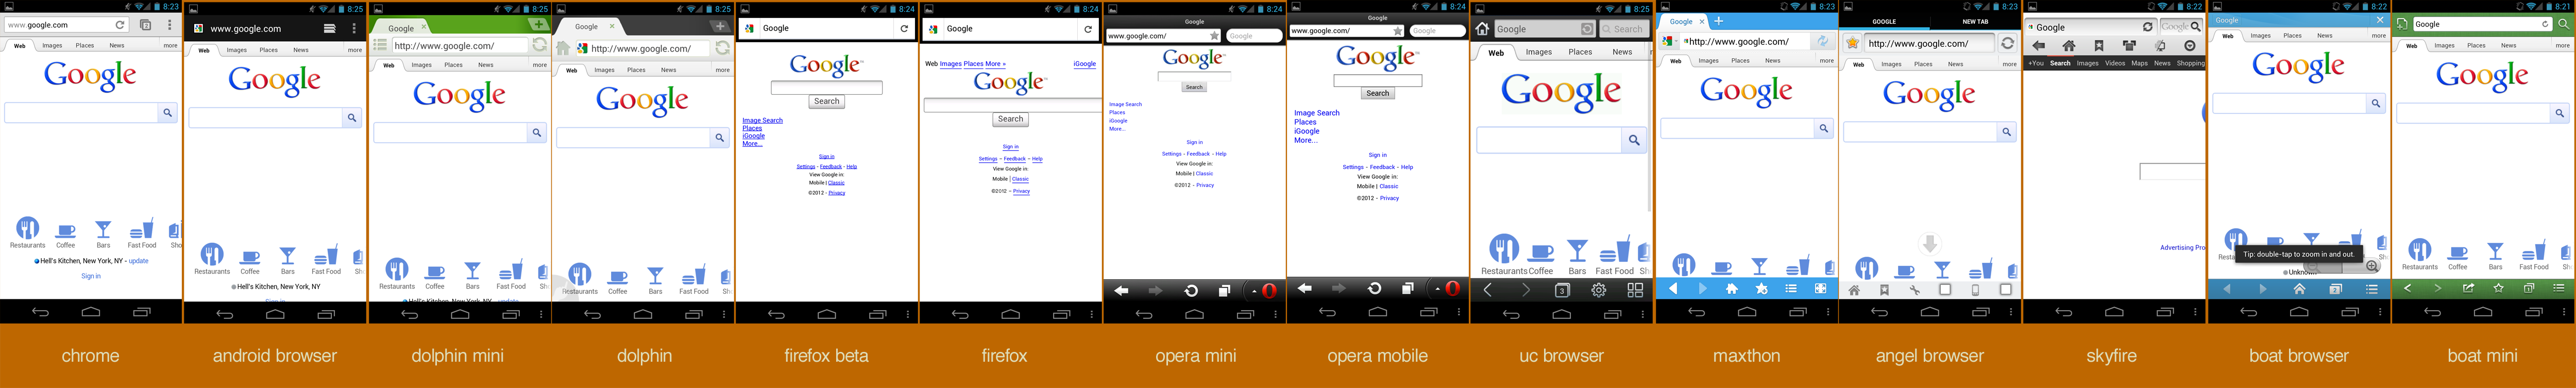 Here&#039;s how Google looks seen through 14 different Android browsers